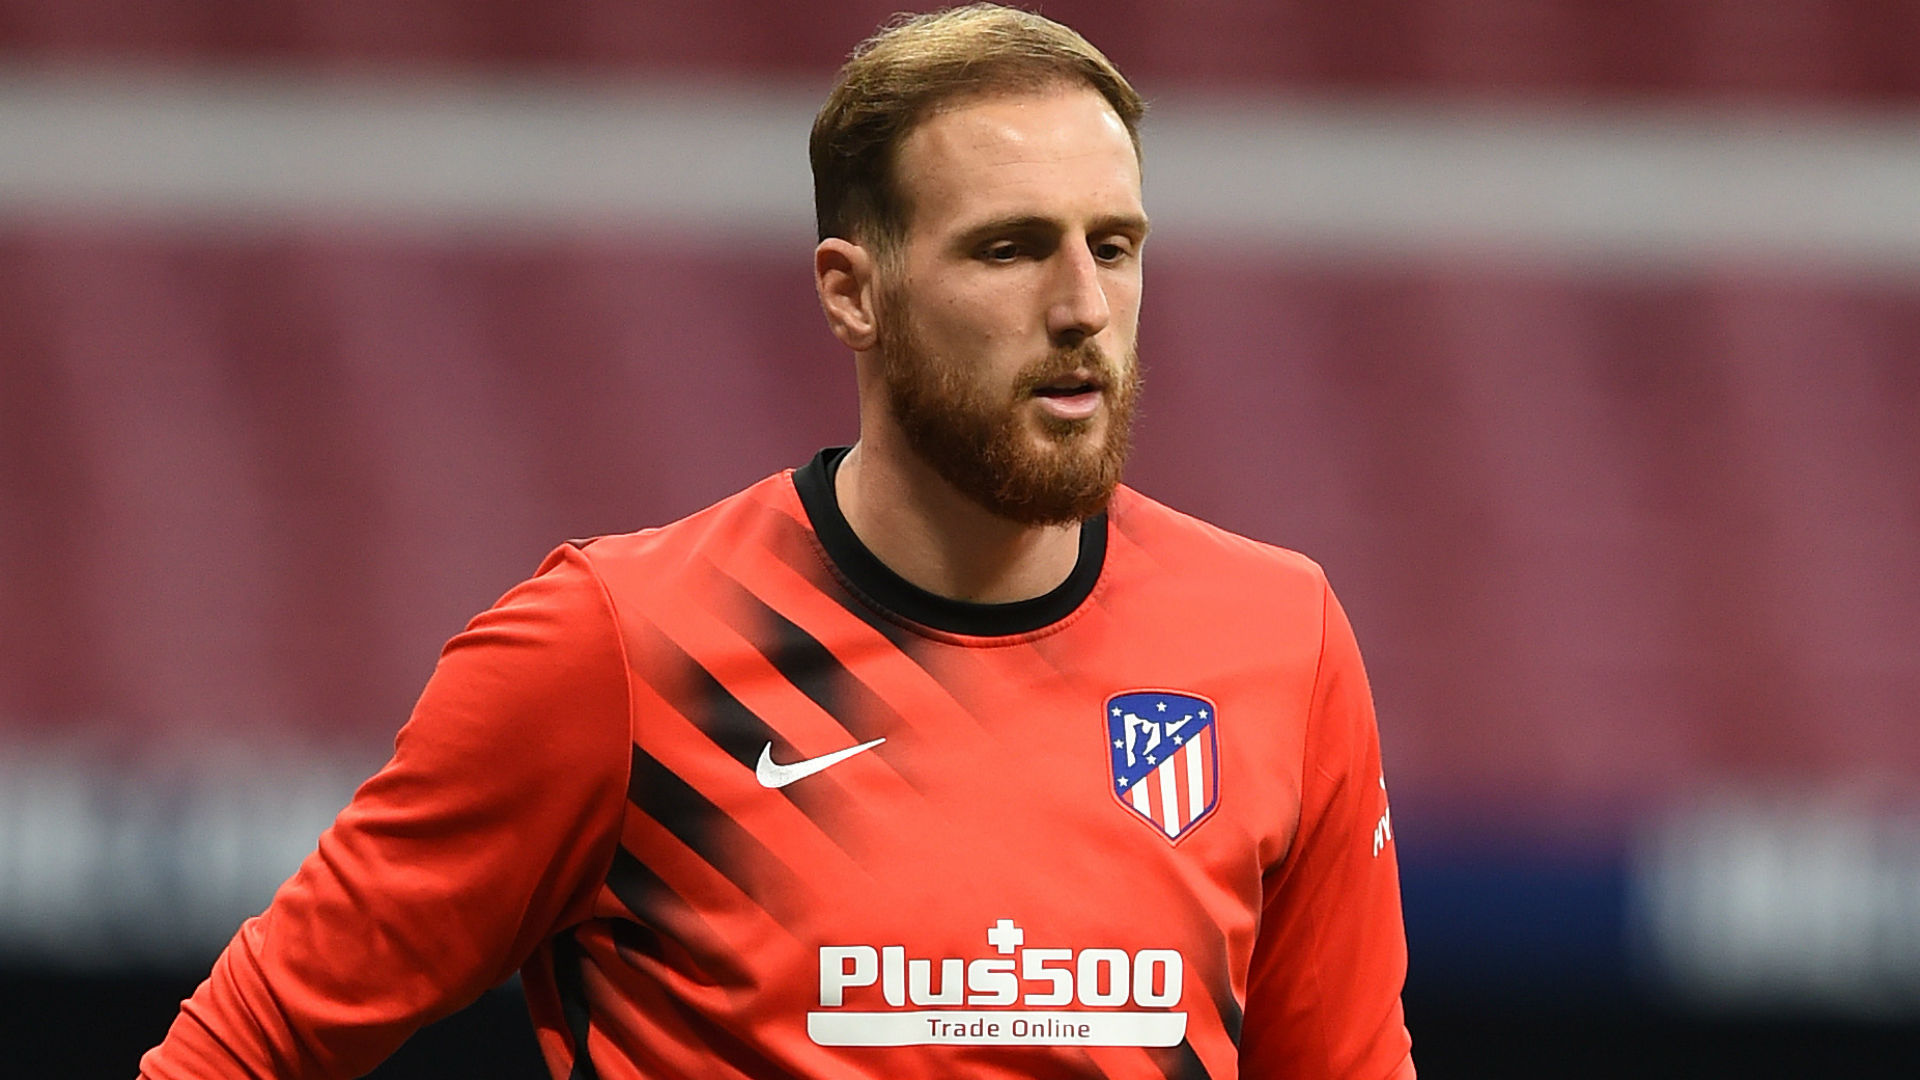 Rumoured interest in Jan Oblak is no shock to Diego Simeone, who hopes the goalkeeper will remain at Atletico Madrid.